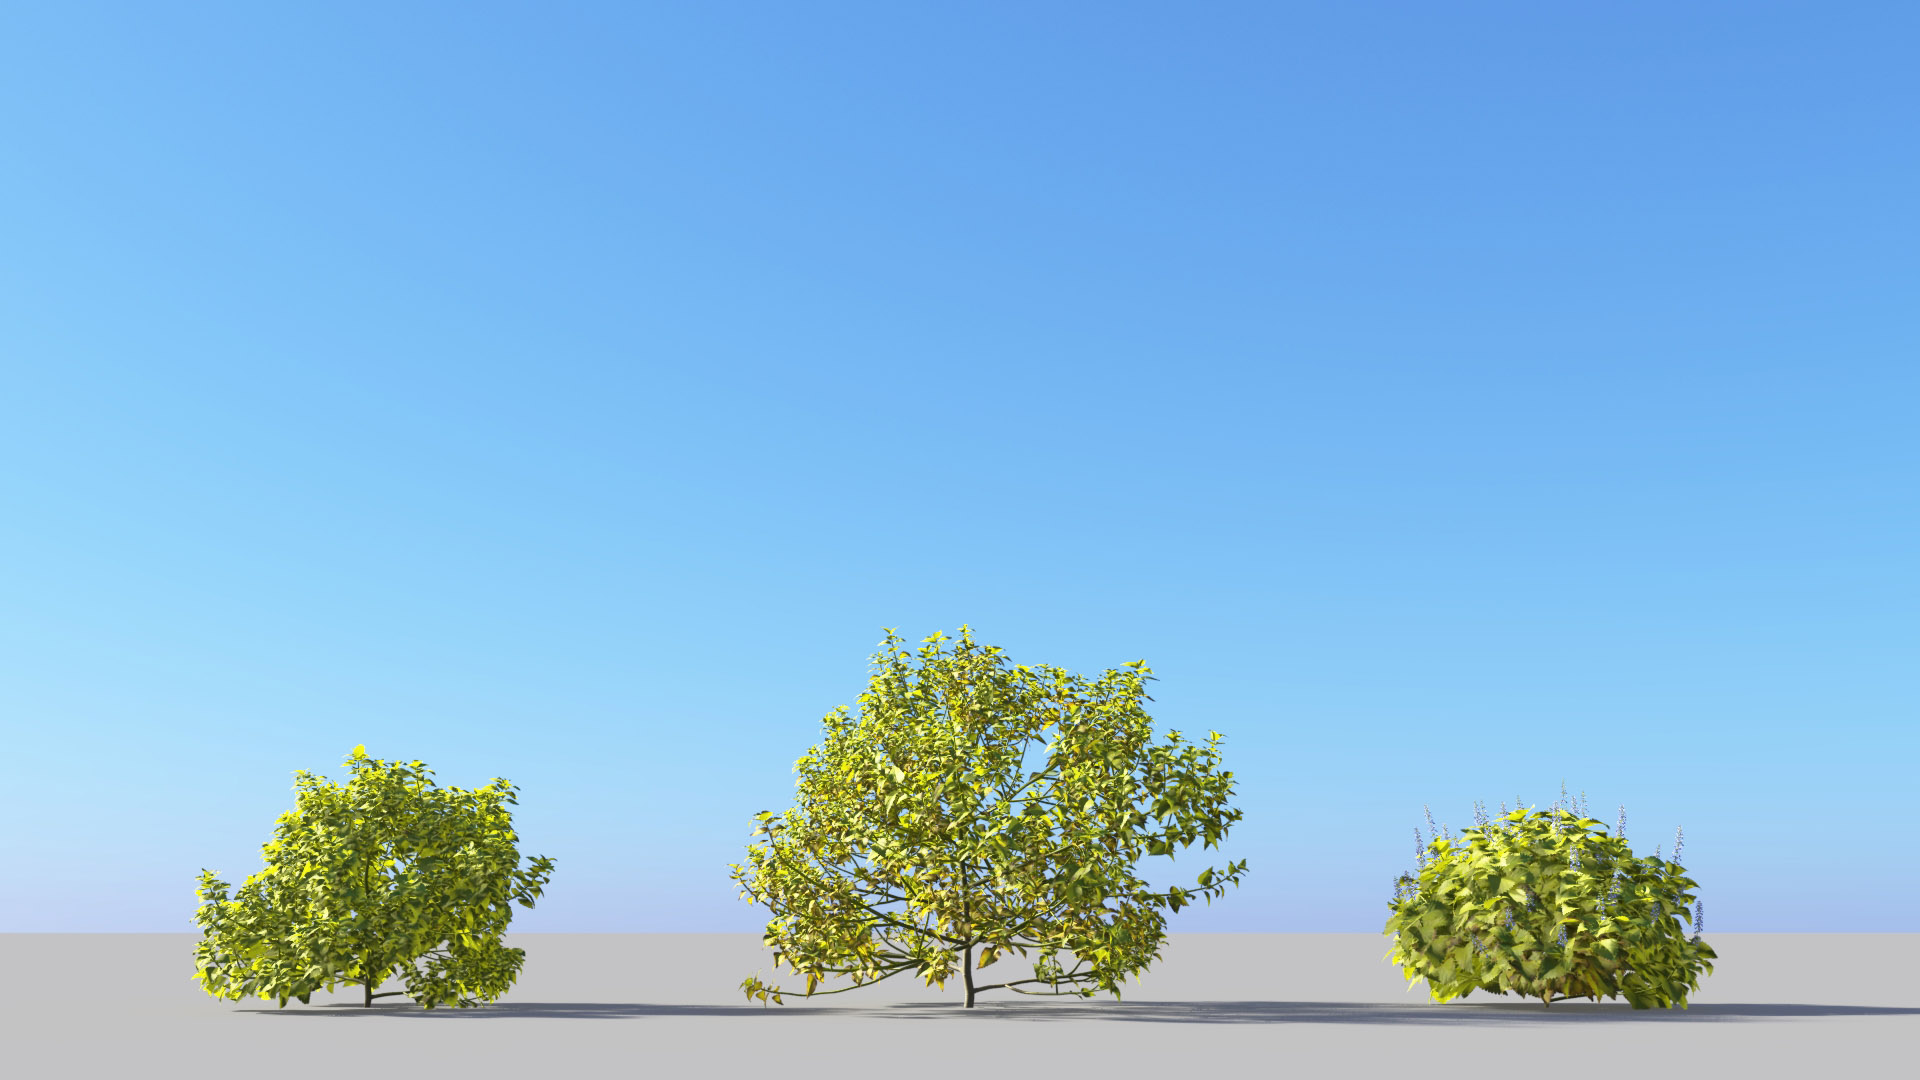 3D model of the Fairway Yellow coleus Plectranthus scutellarioides 'Fairway Yellow' published parameters